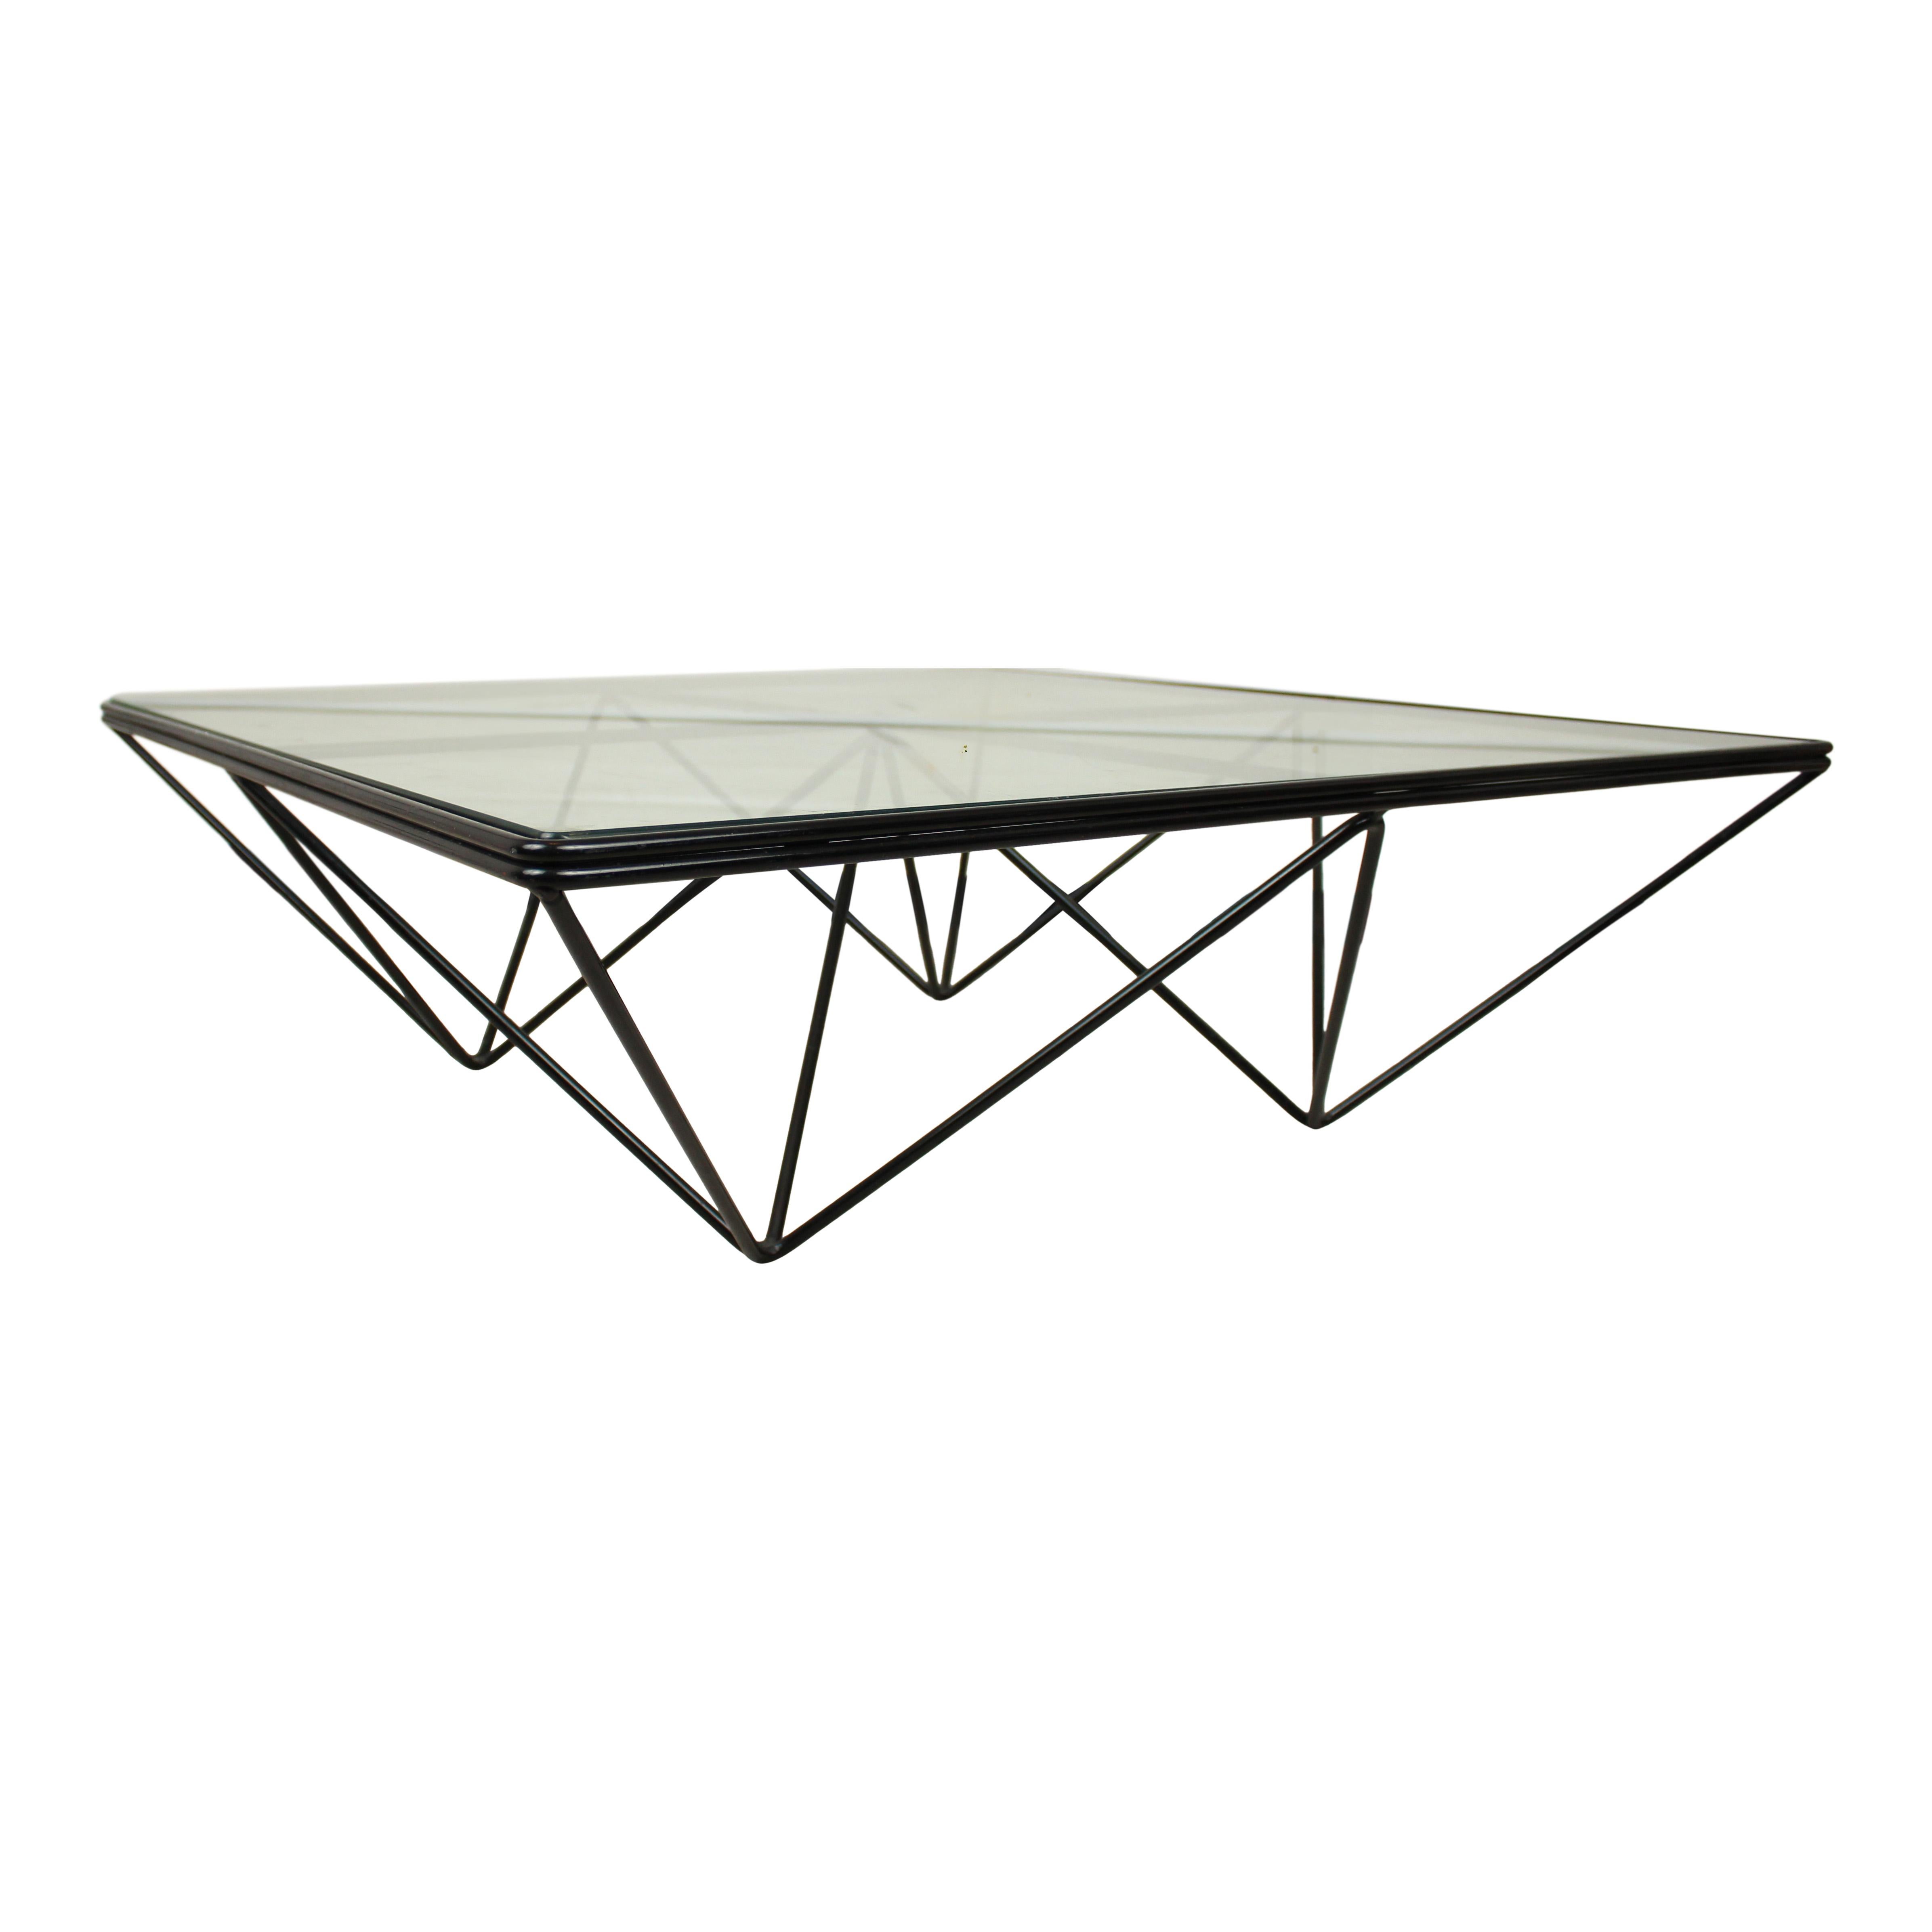 Industrial Italian Design Coffee Table in The Style of Alanda by Paolo Piva, 1980s For Sale